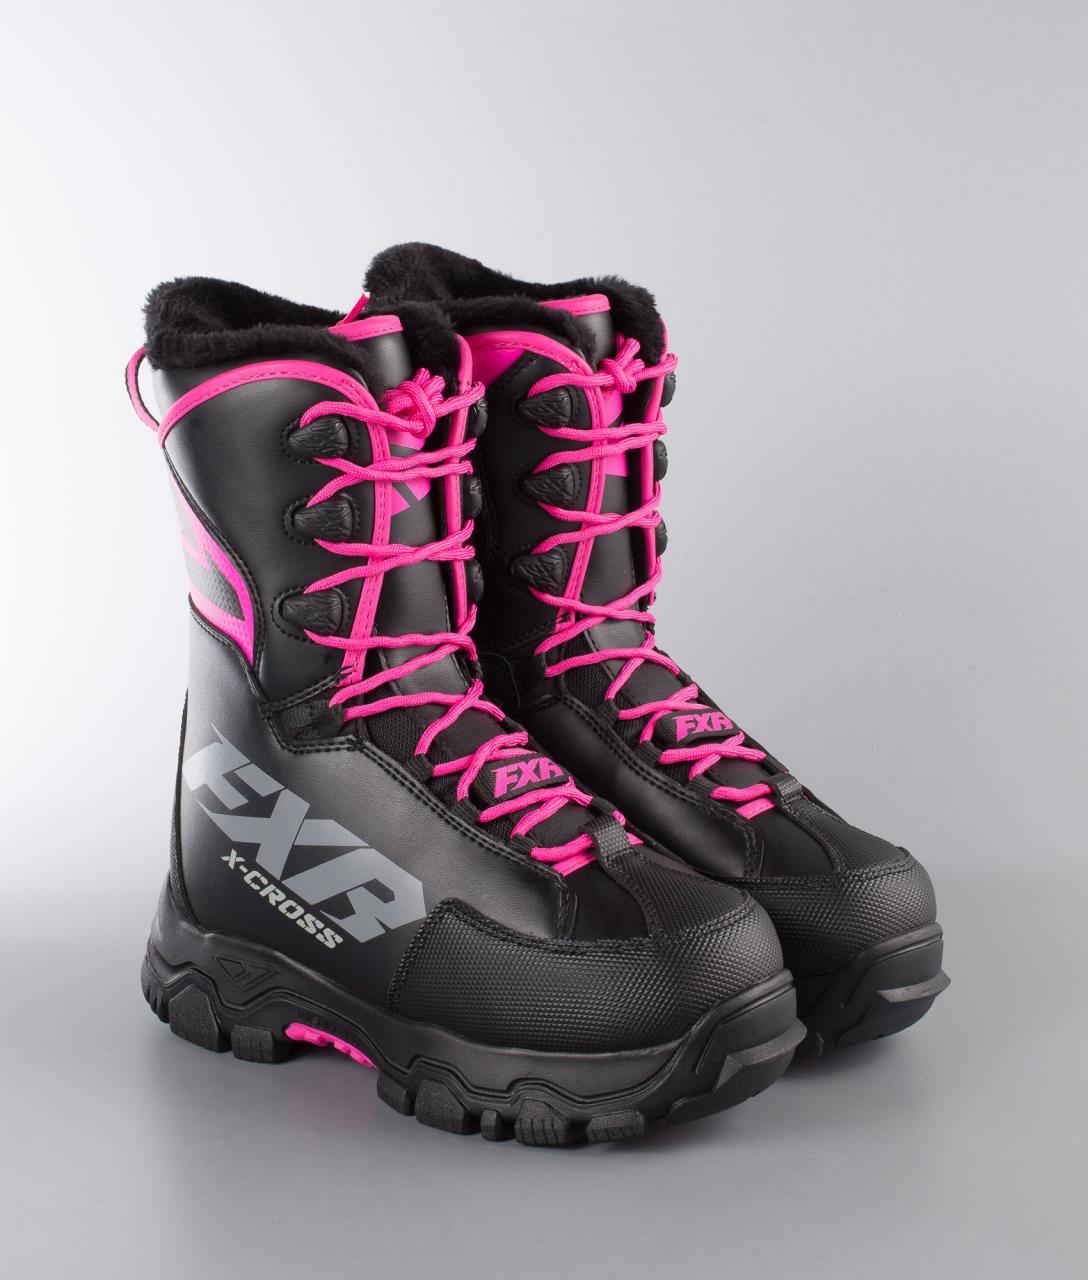 Fxr X Cross Speed Boots Best Sale, UP TO 58% OFF